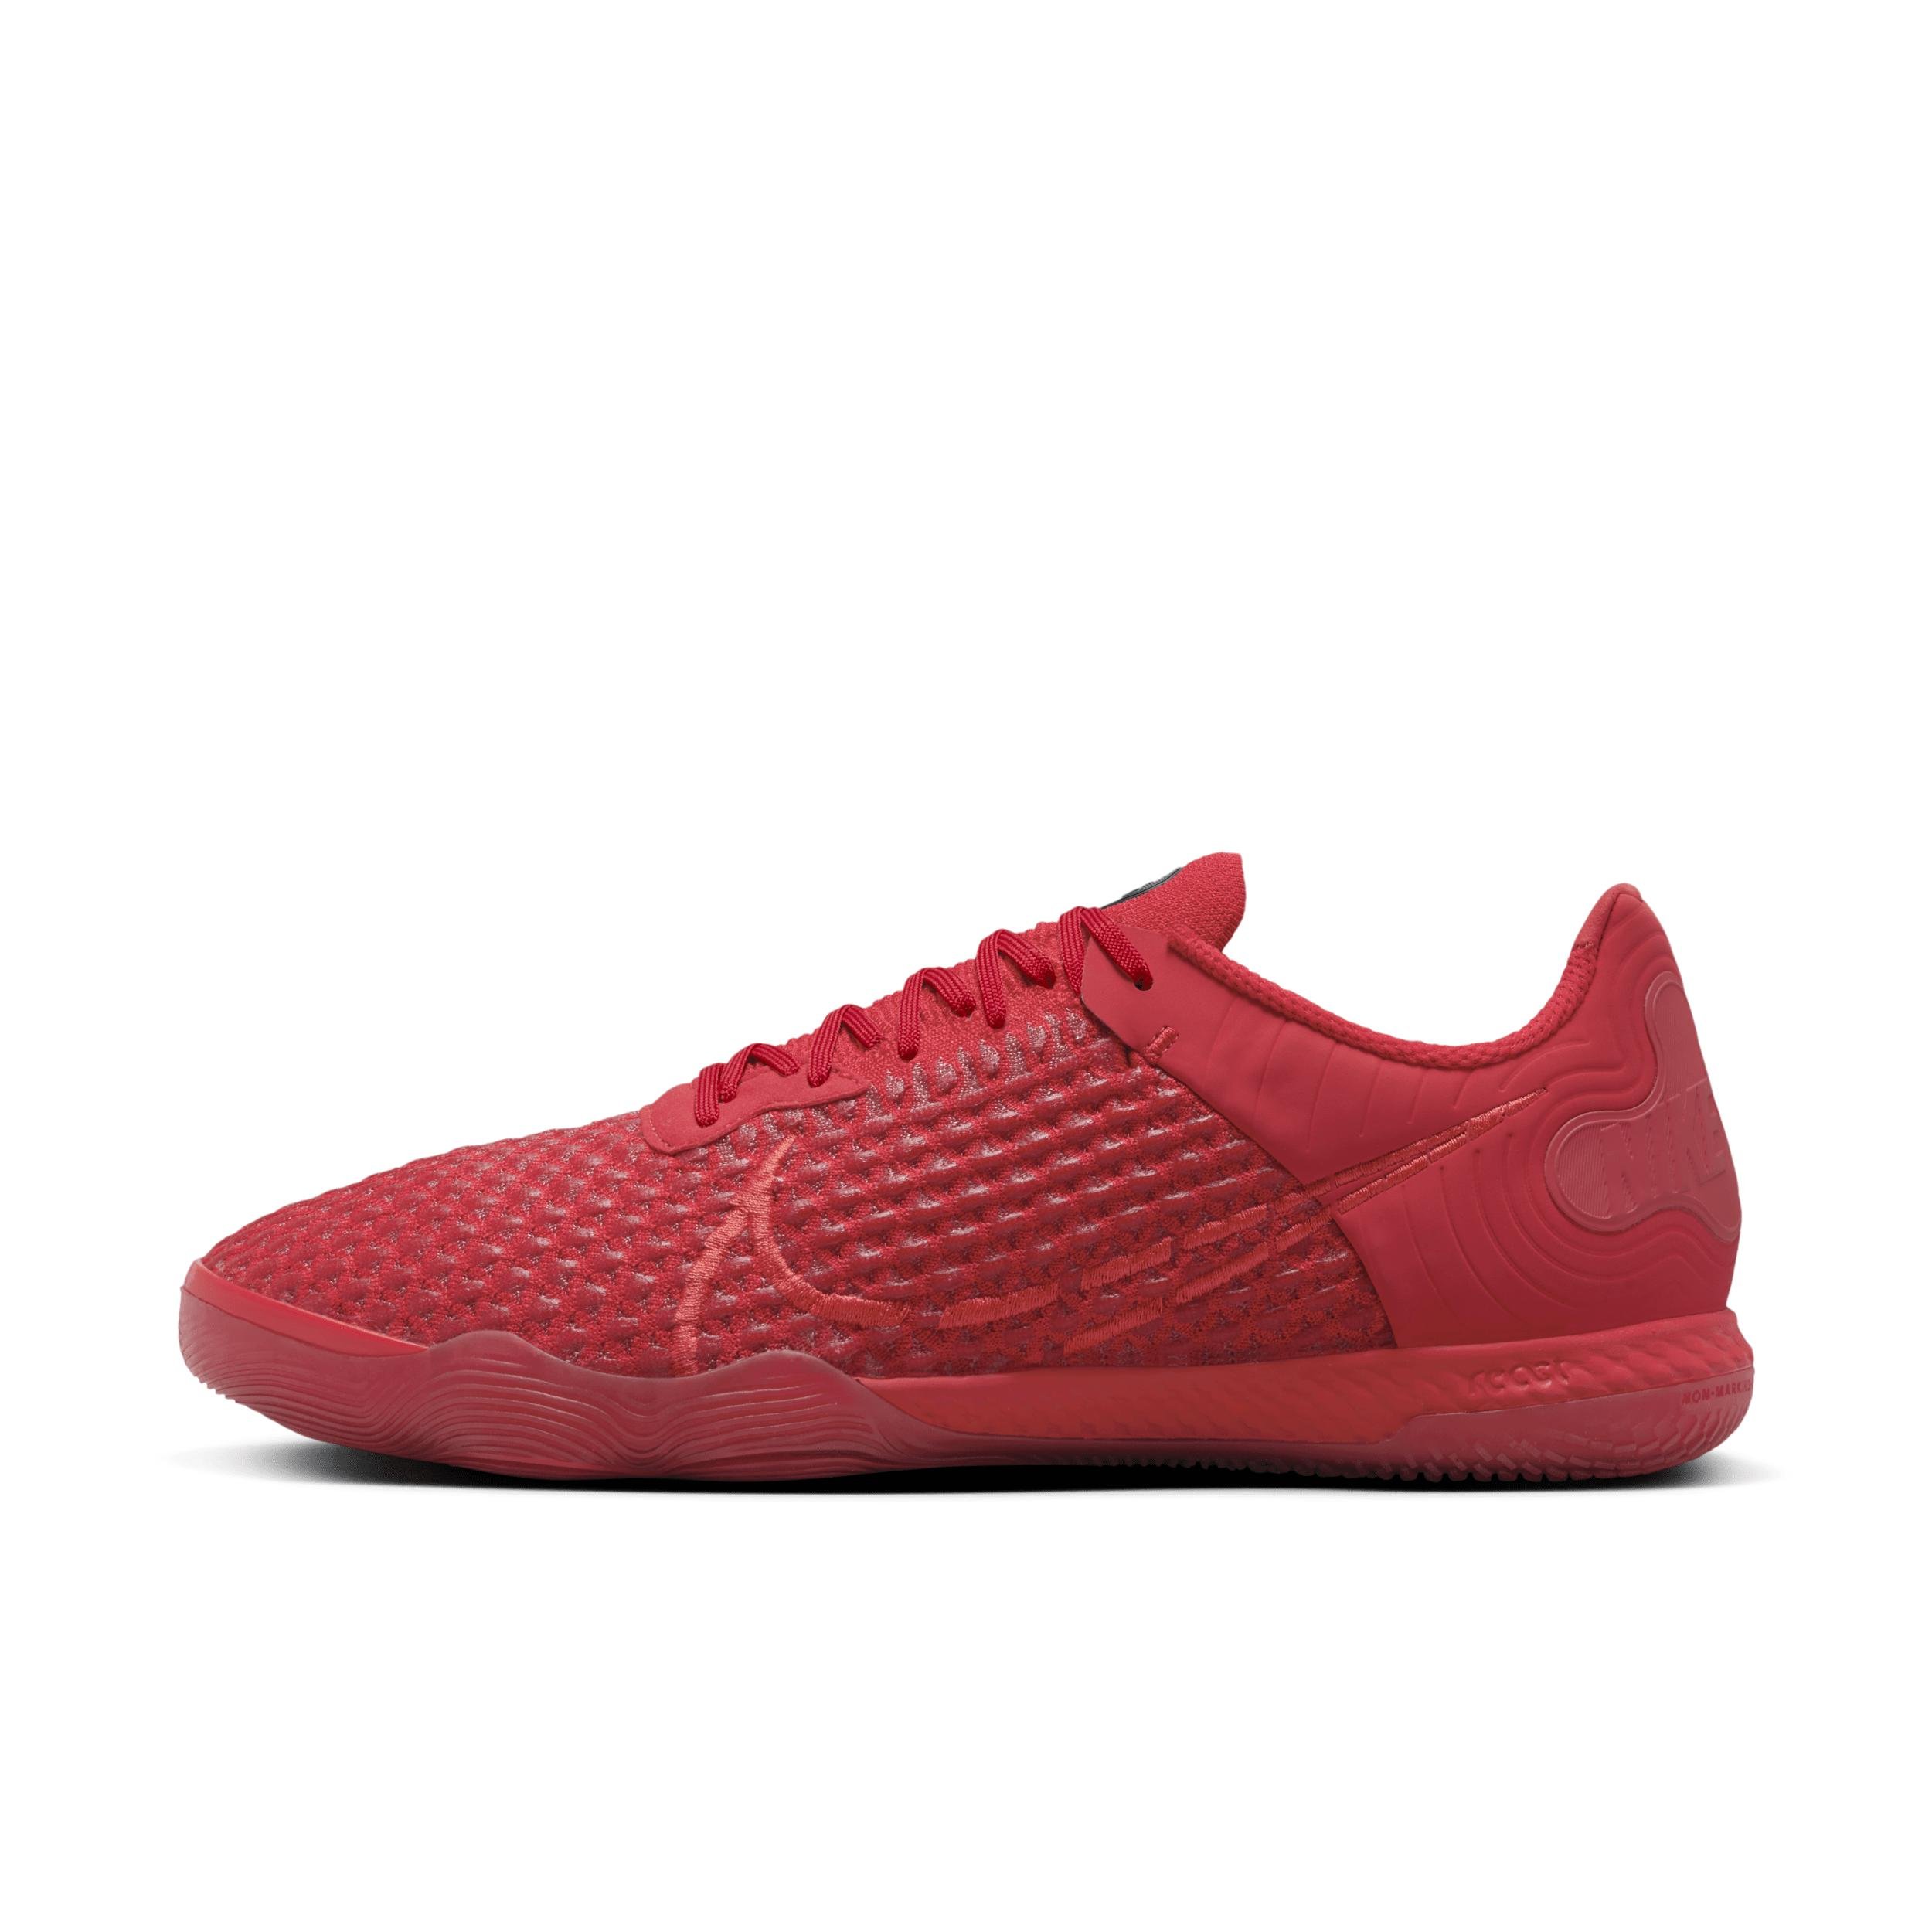 Nike Men's React Gato Indoor/Court Low-Top Soccer Shoes by NIKE